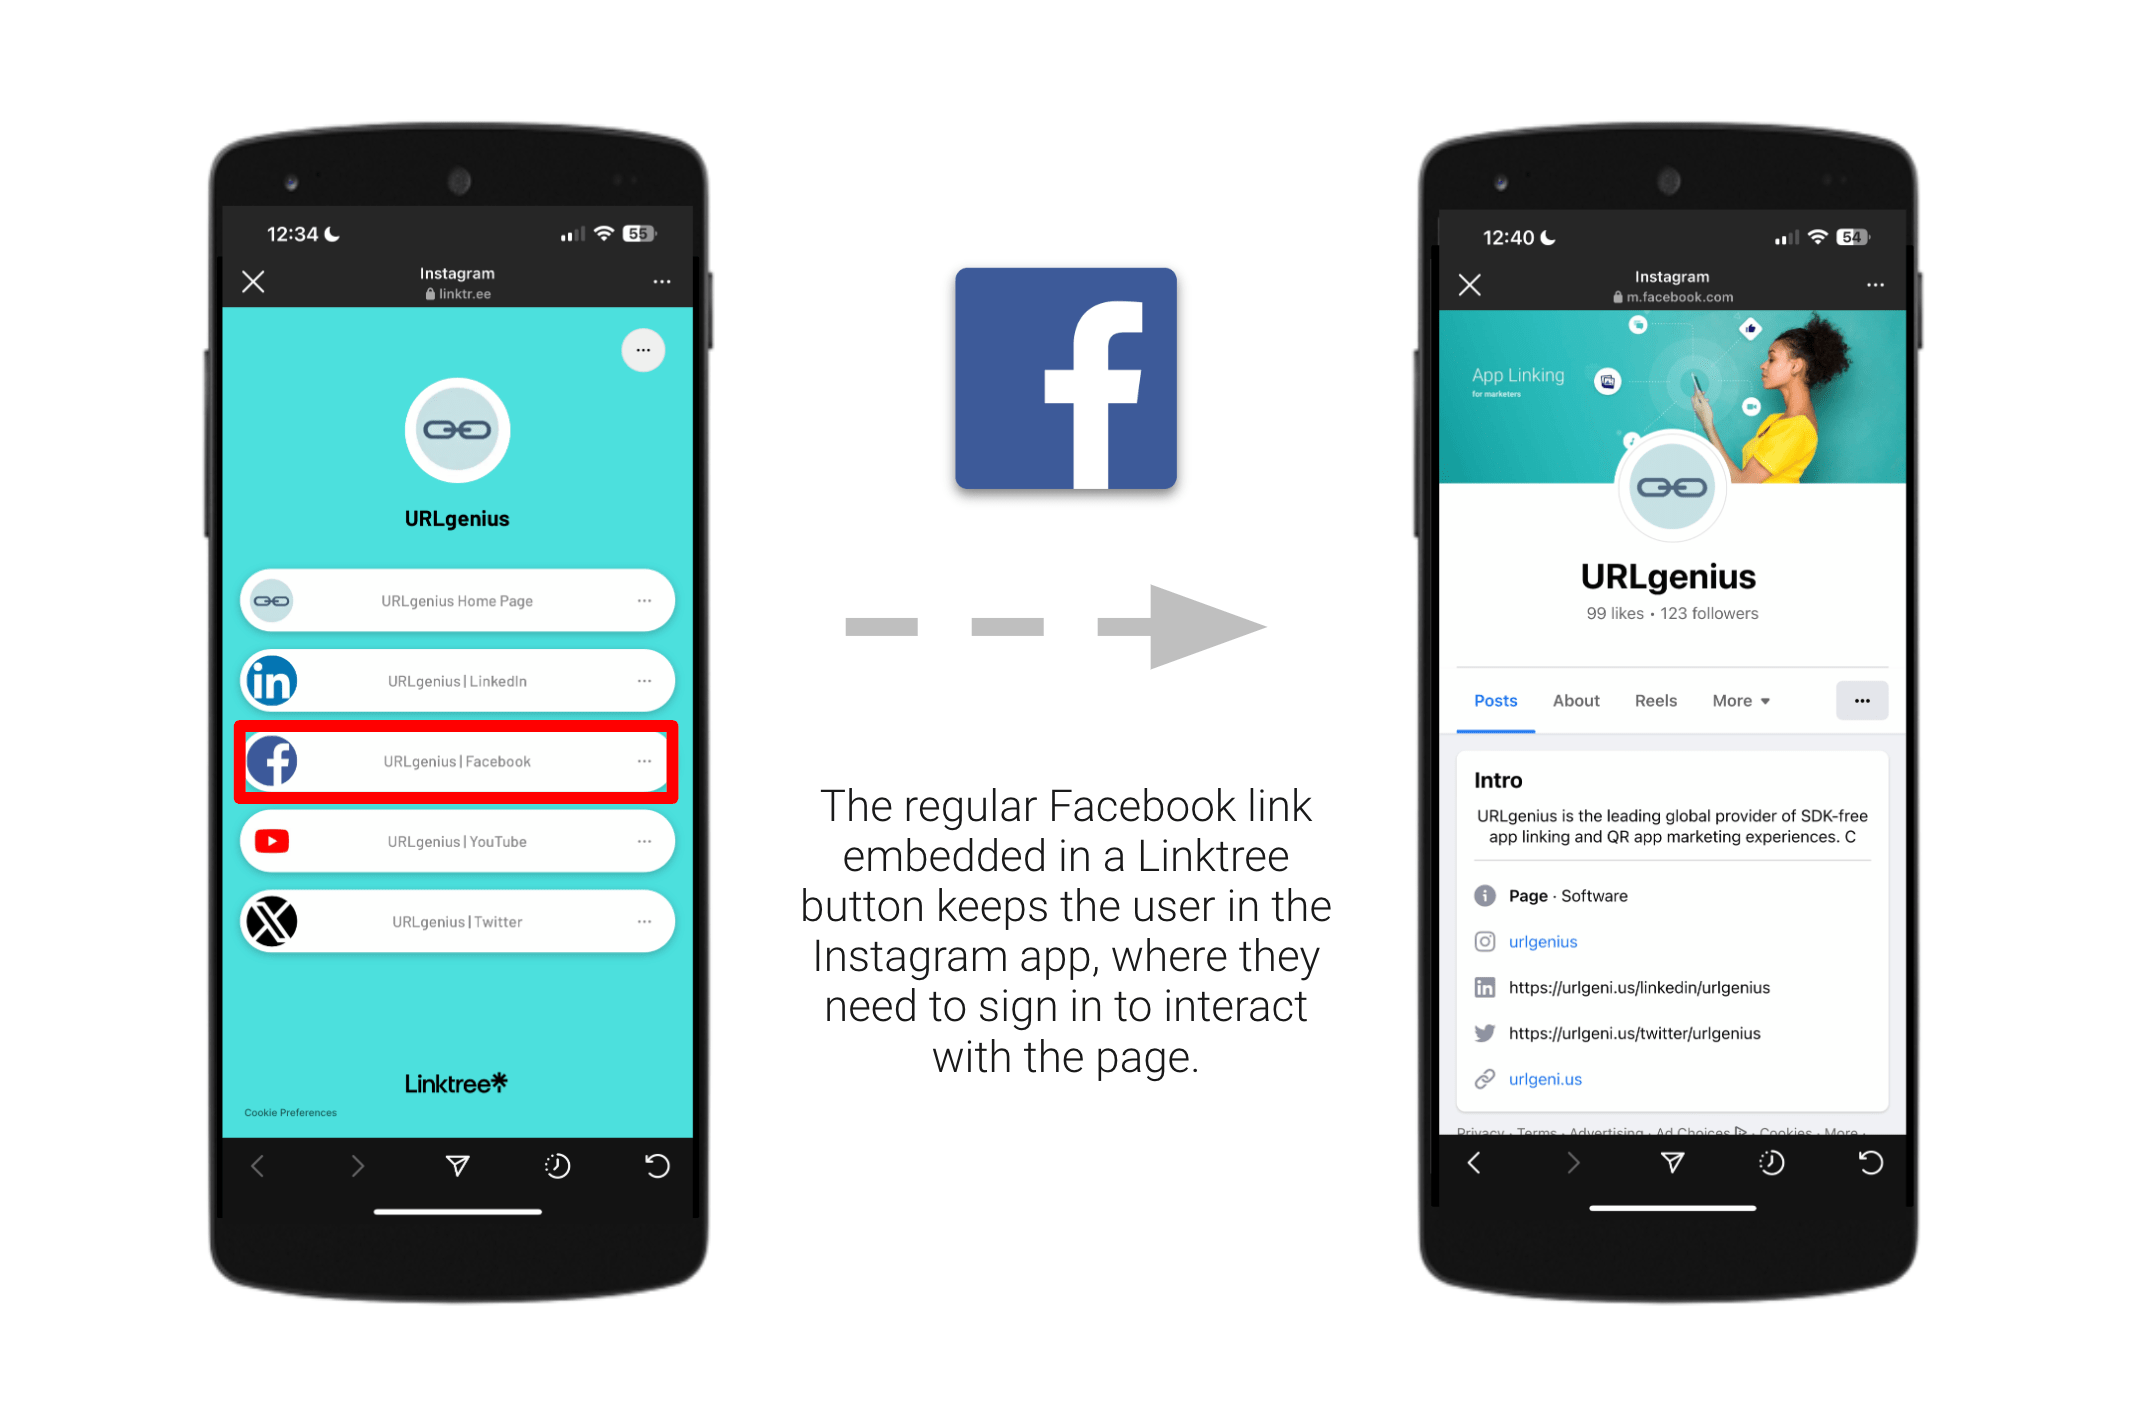 The regular Facebook link embedded in a Linktree button keeps the user in the Instagram app, where they need to sign in to interact with the page